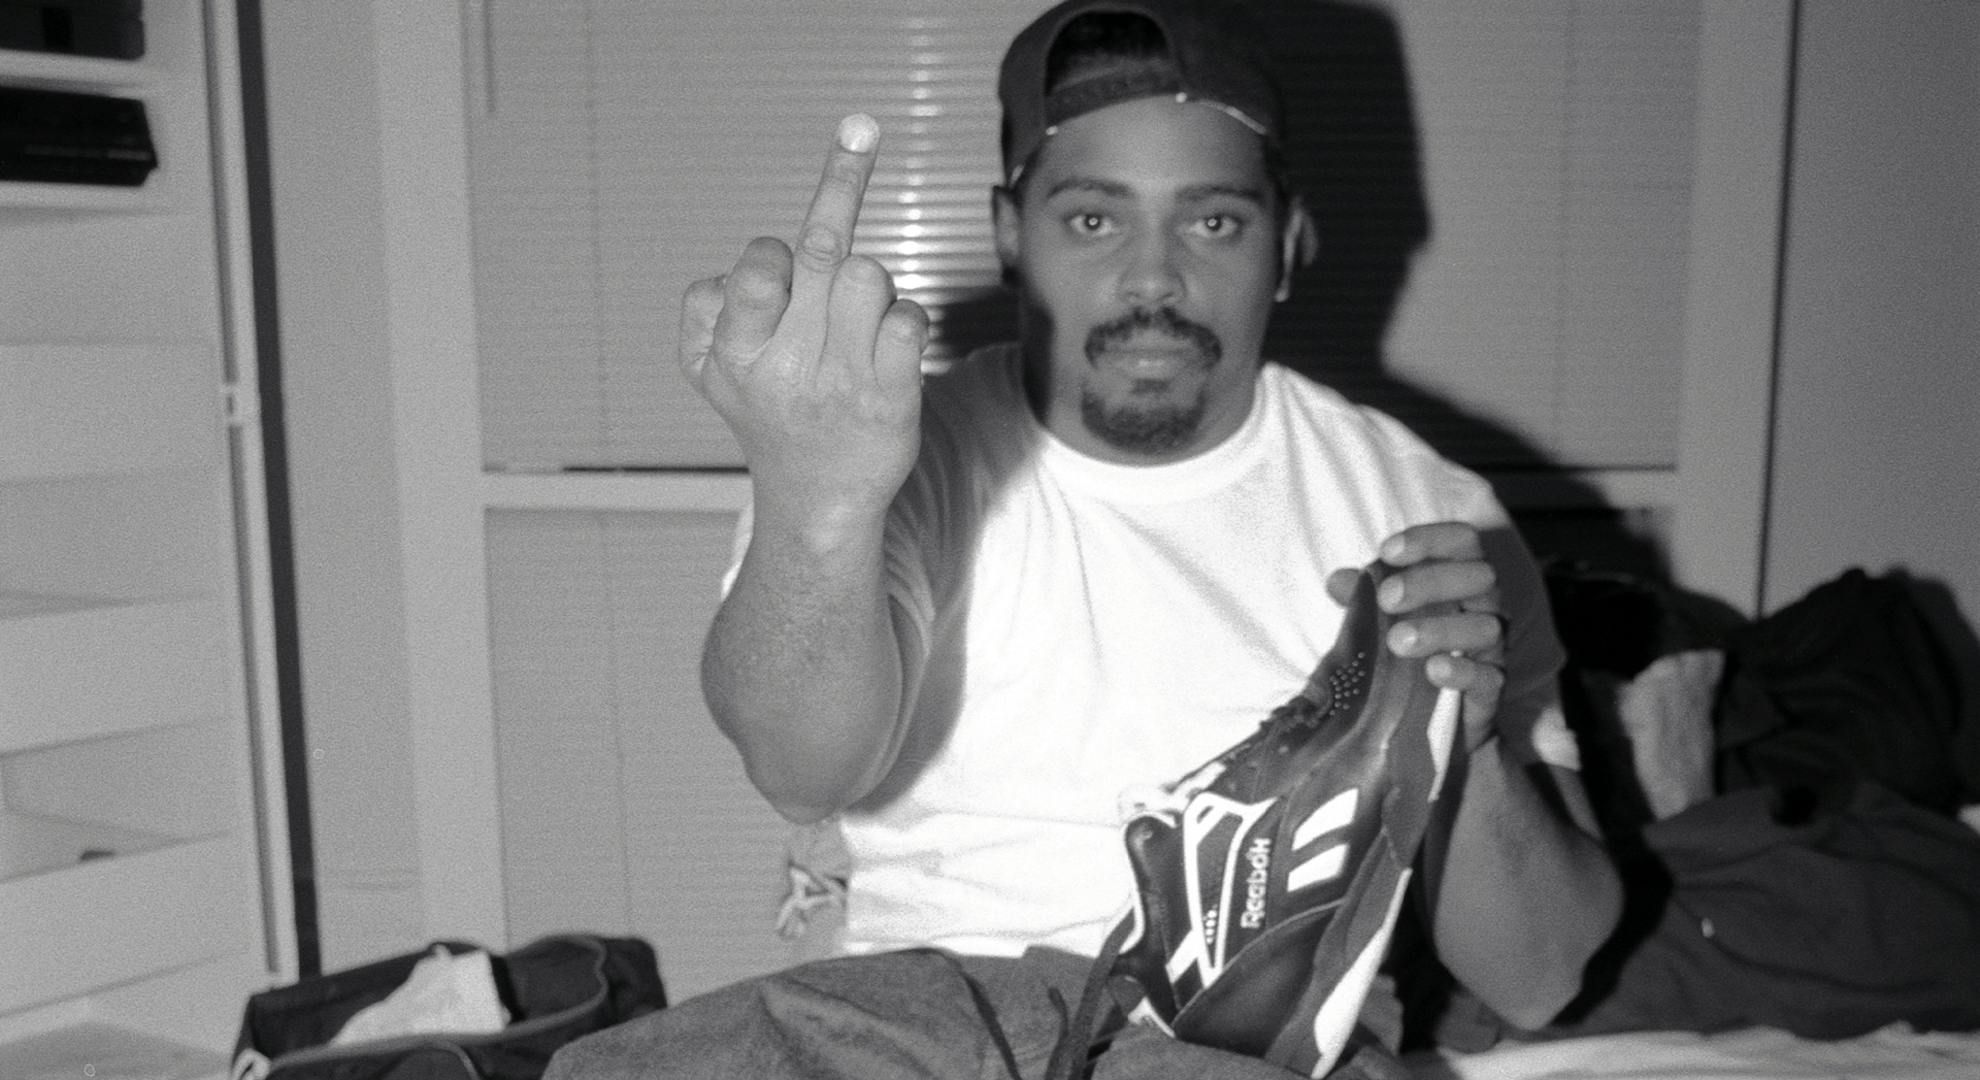 Sen Dog of Cypress Hill giving the middle finger